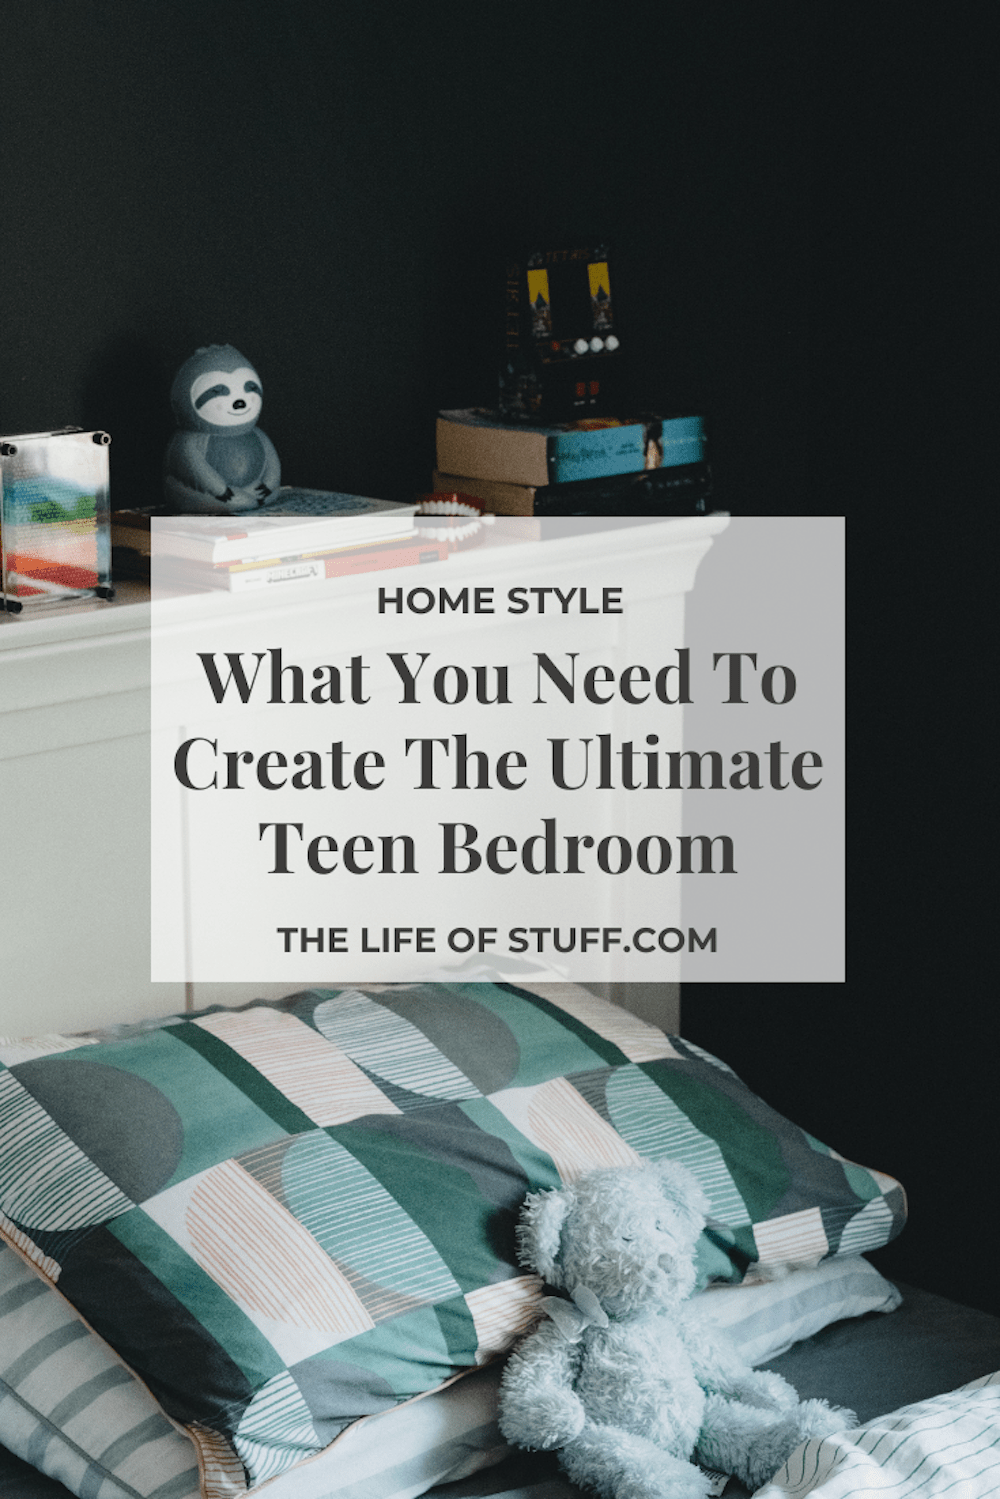 What You Need To Create The Ultimate Teen Bedroom - The Life of Stuff